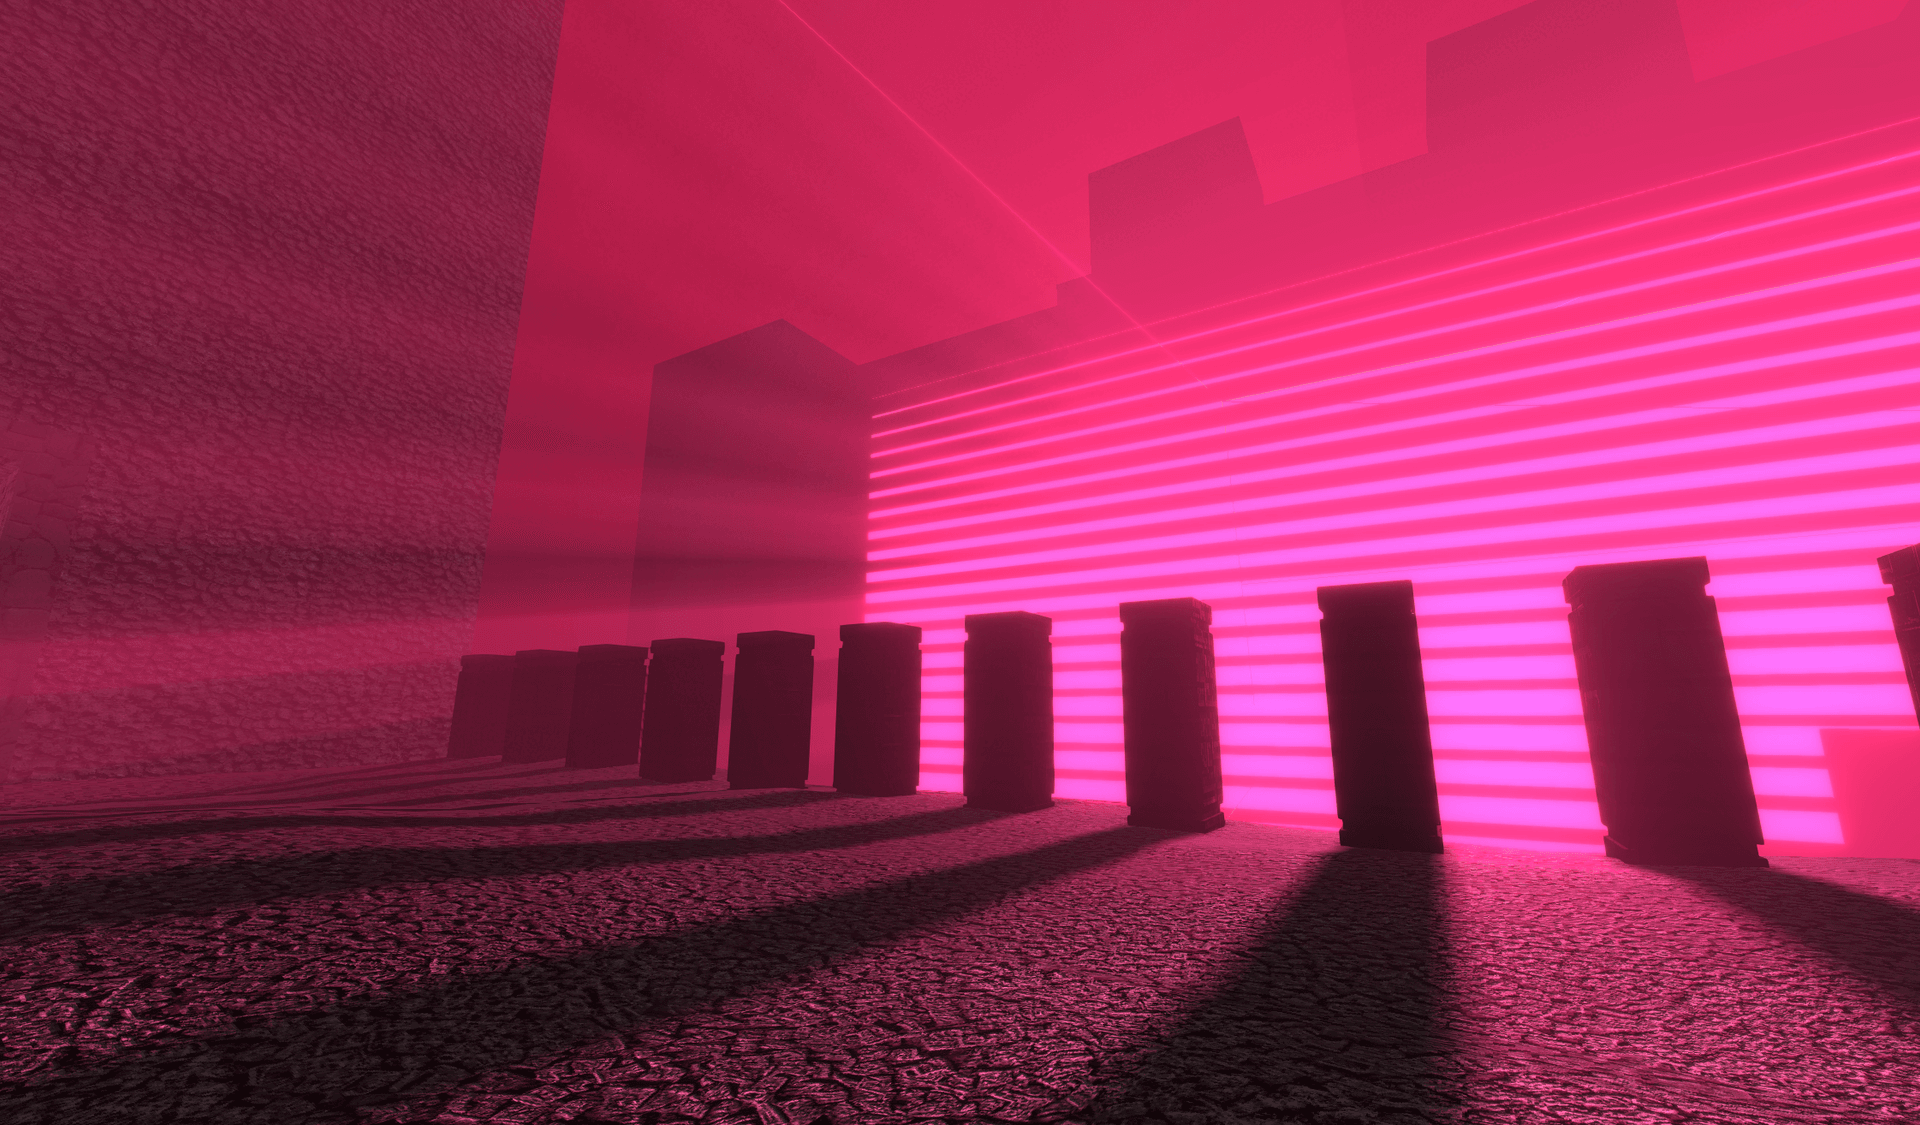 A screenshot of the three-good-godrays demo showing a scene with volumetric lighting and godrays.  A bright pink light shines through a vertical array of black slats set in the side of a huge indistinct black structure in the background.  There are very prominent and intense godrays in the air, giving it the appearance of being very humid or smokey.  The ground is rock and there are black pillars casting long and stark shadows across it.